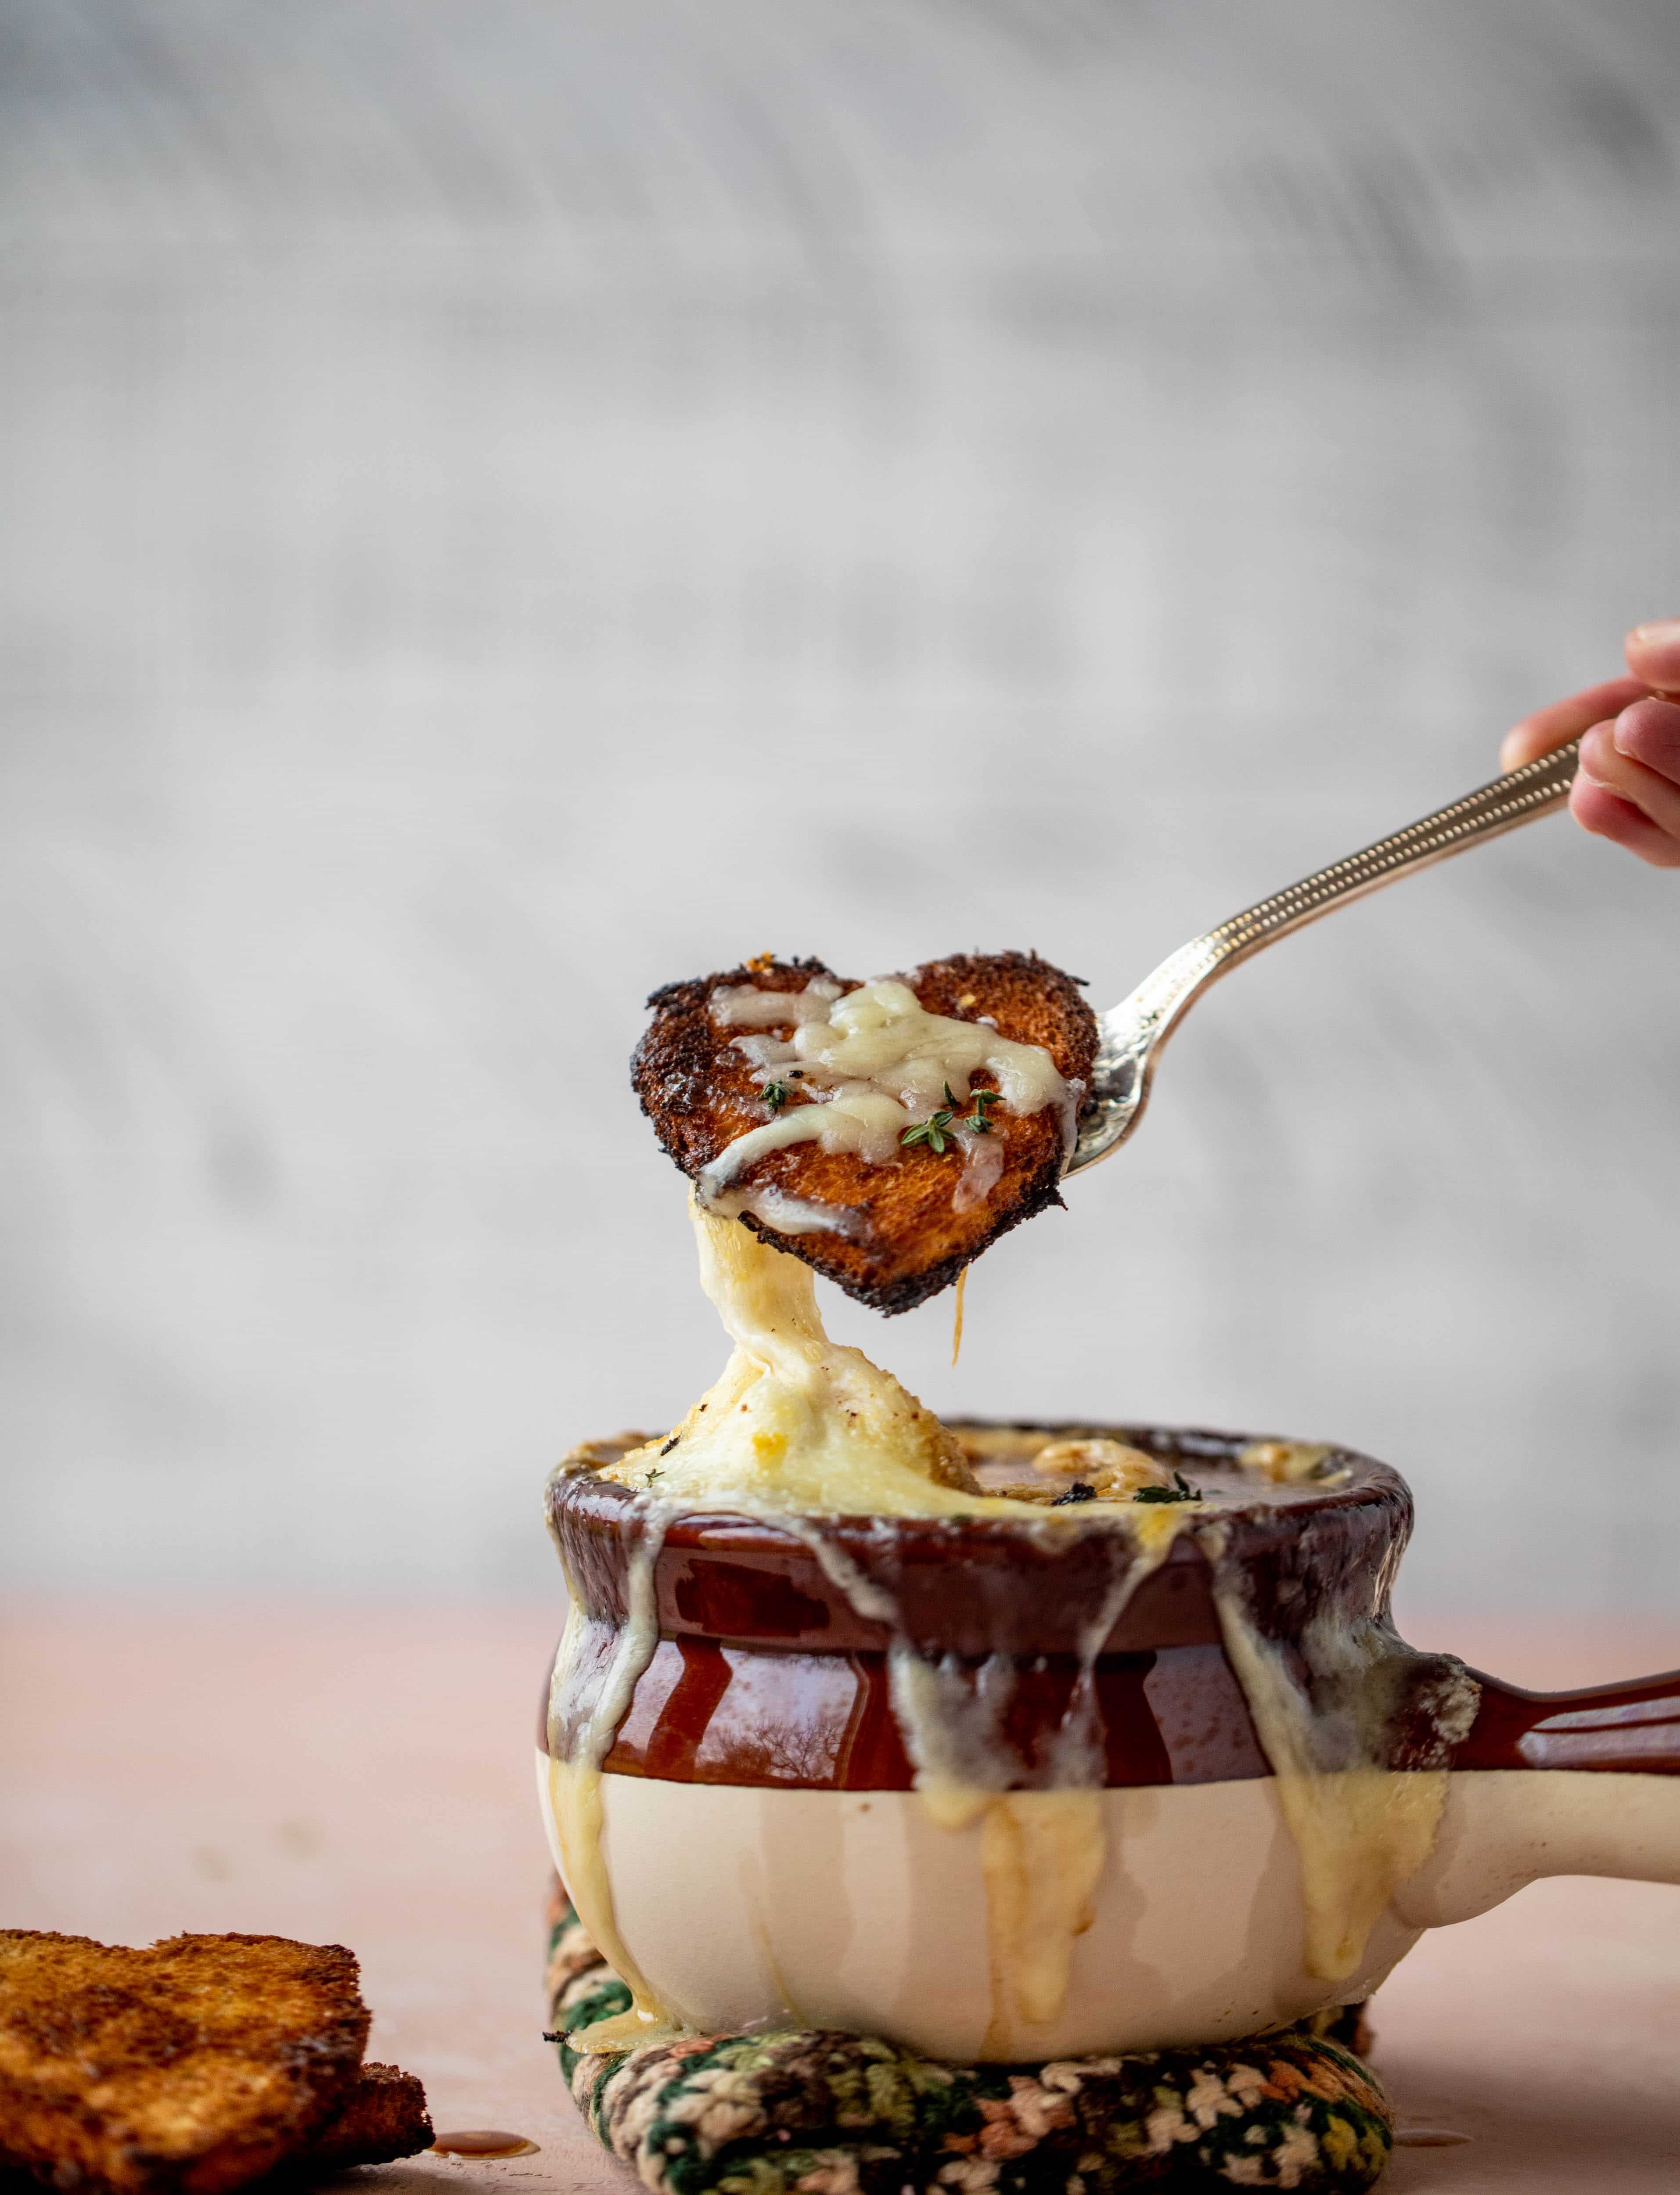 My favorite french onion soup starts with bourbon caramelized onions! Adorable heart croutons and tons of gruyere take it over the top.